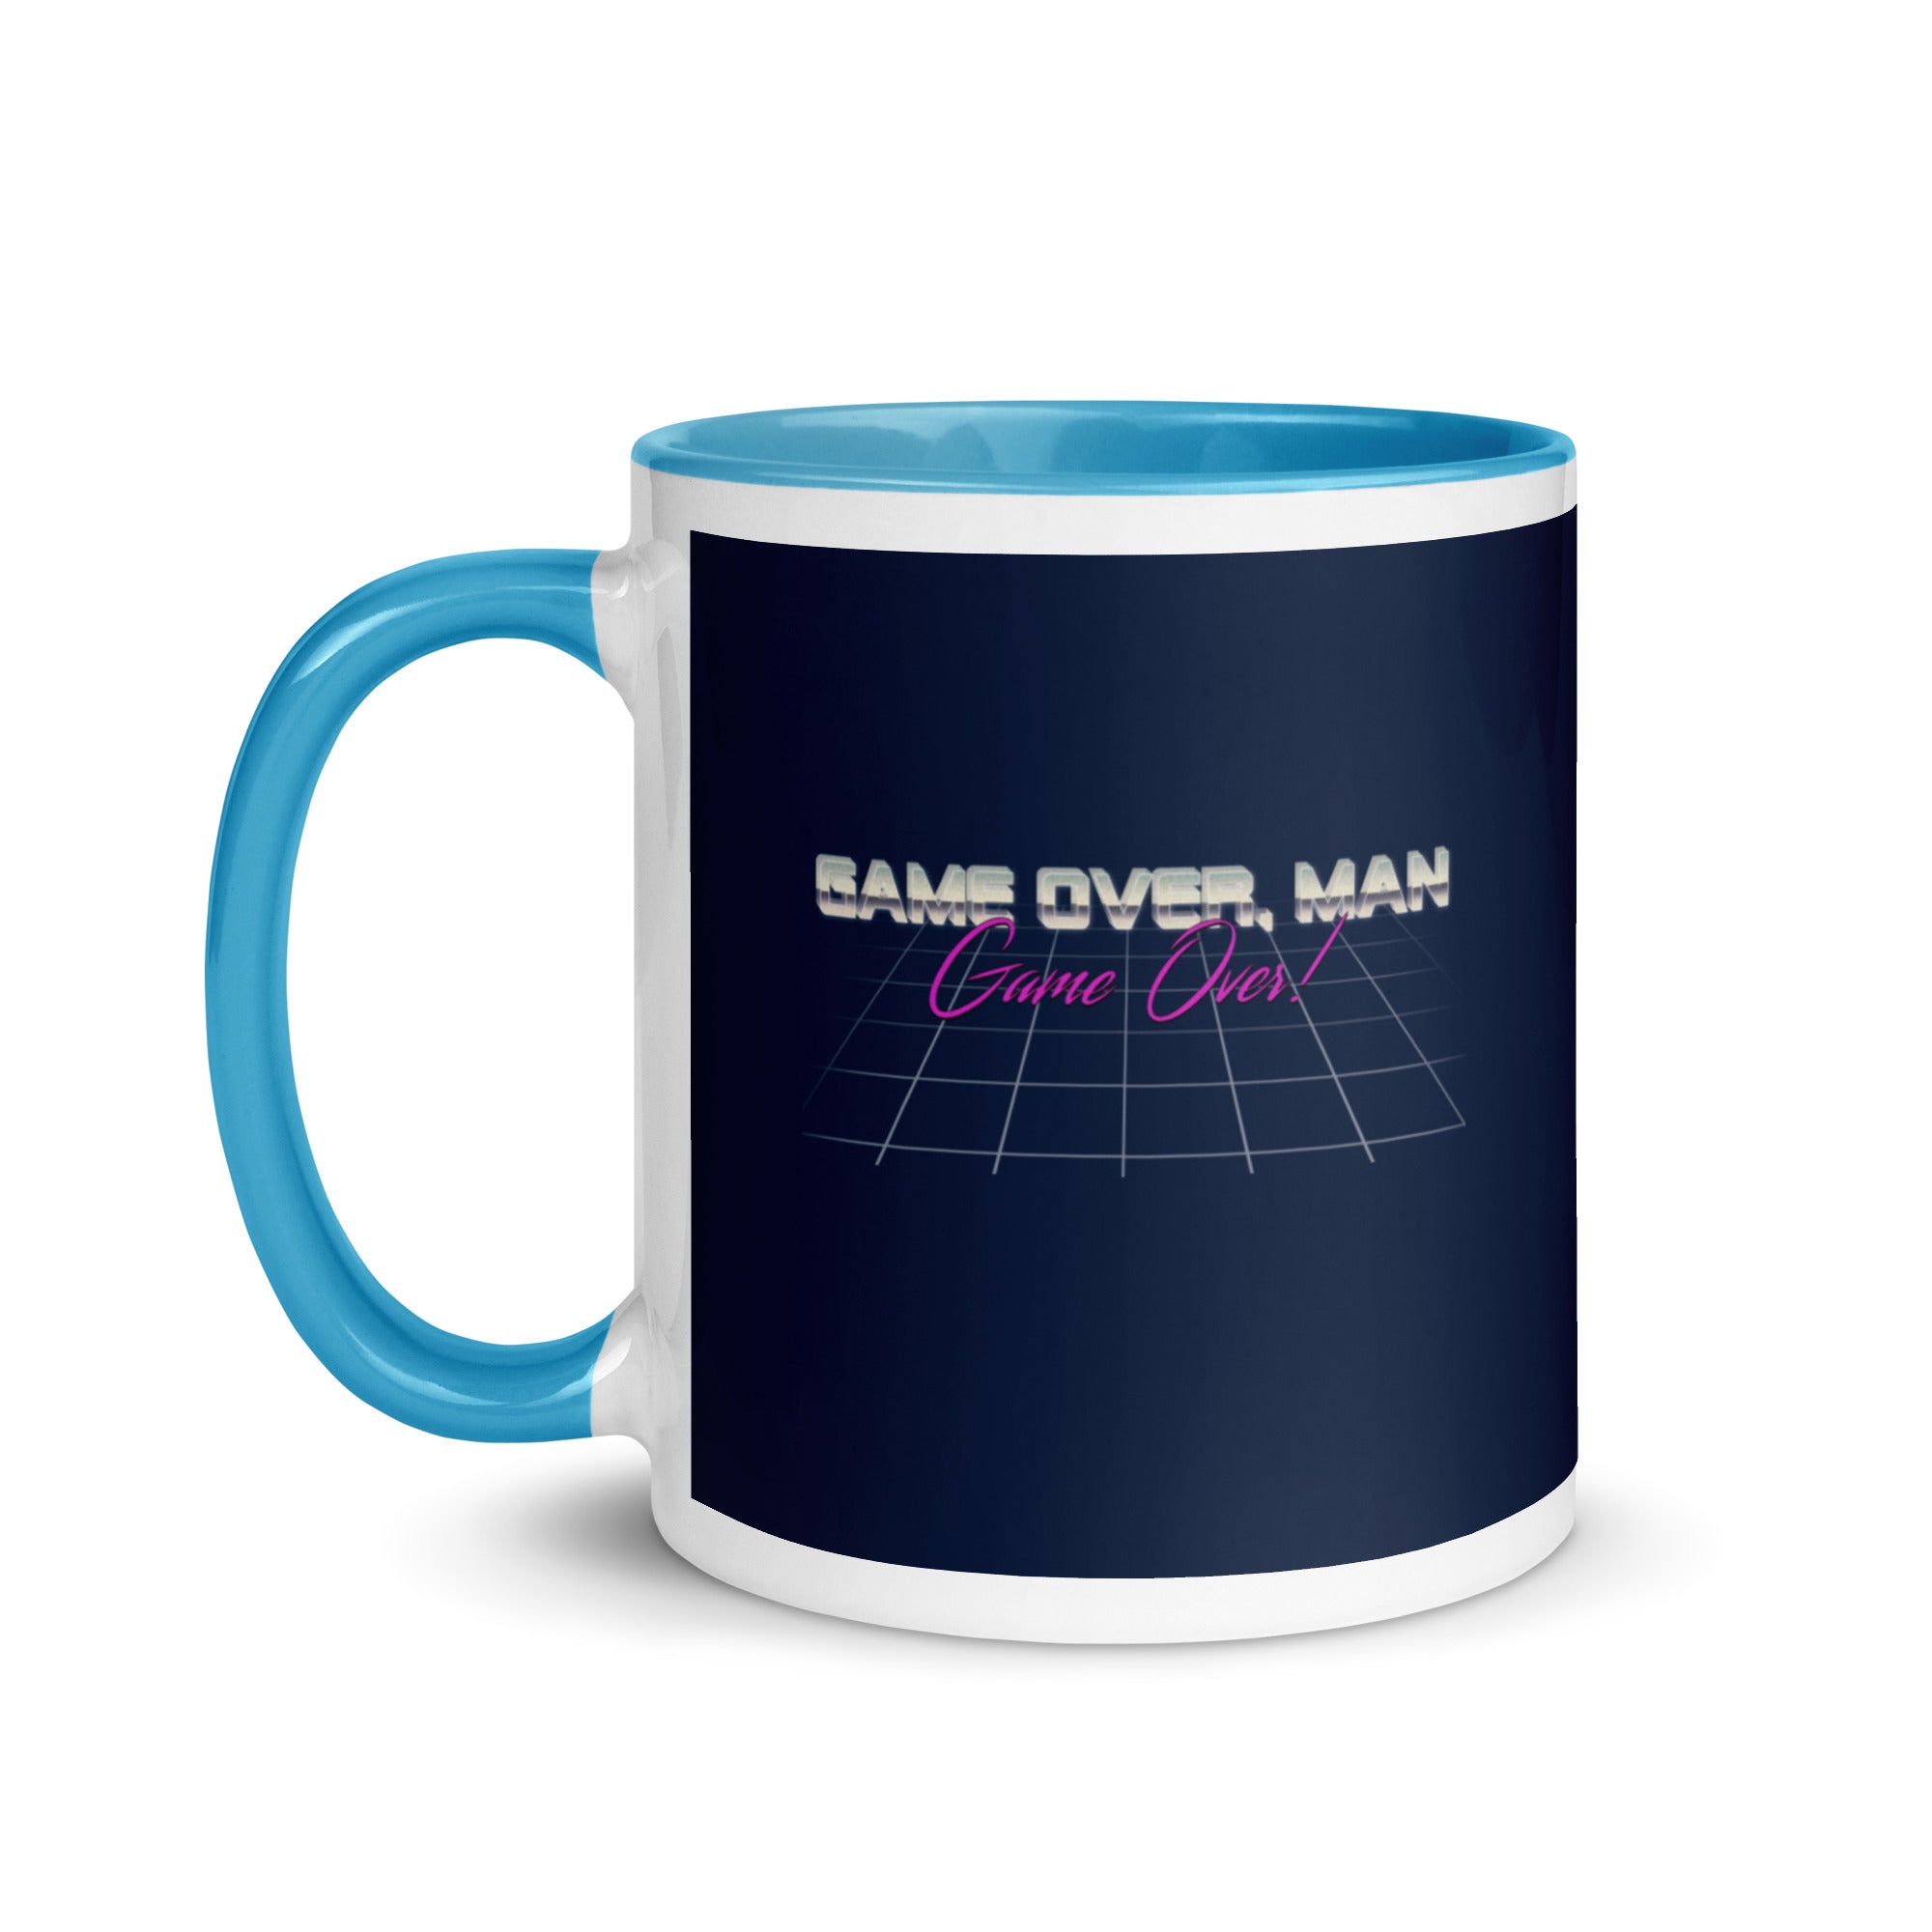 a black and white coffee mug with the words game over man on it